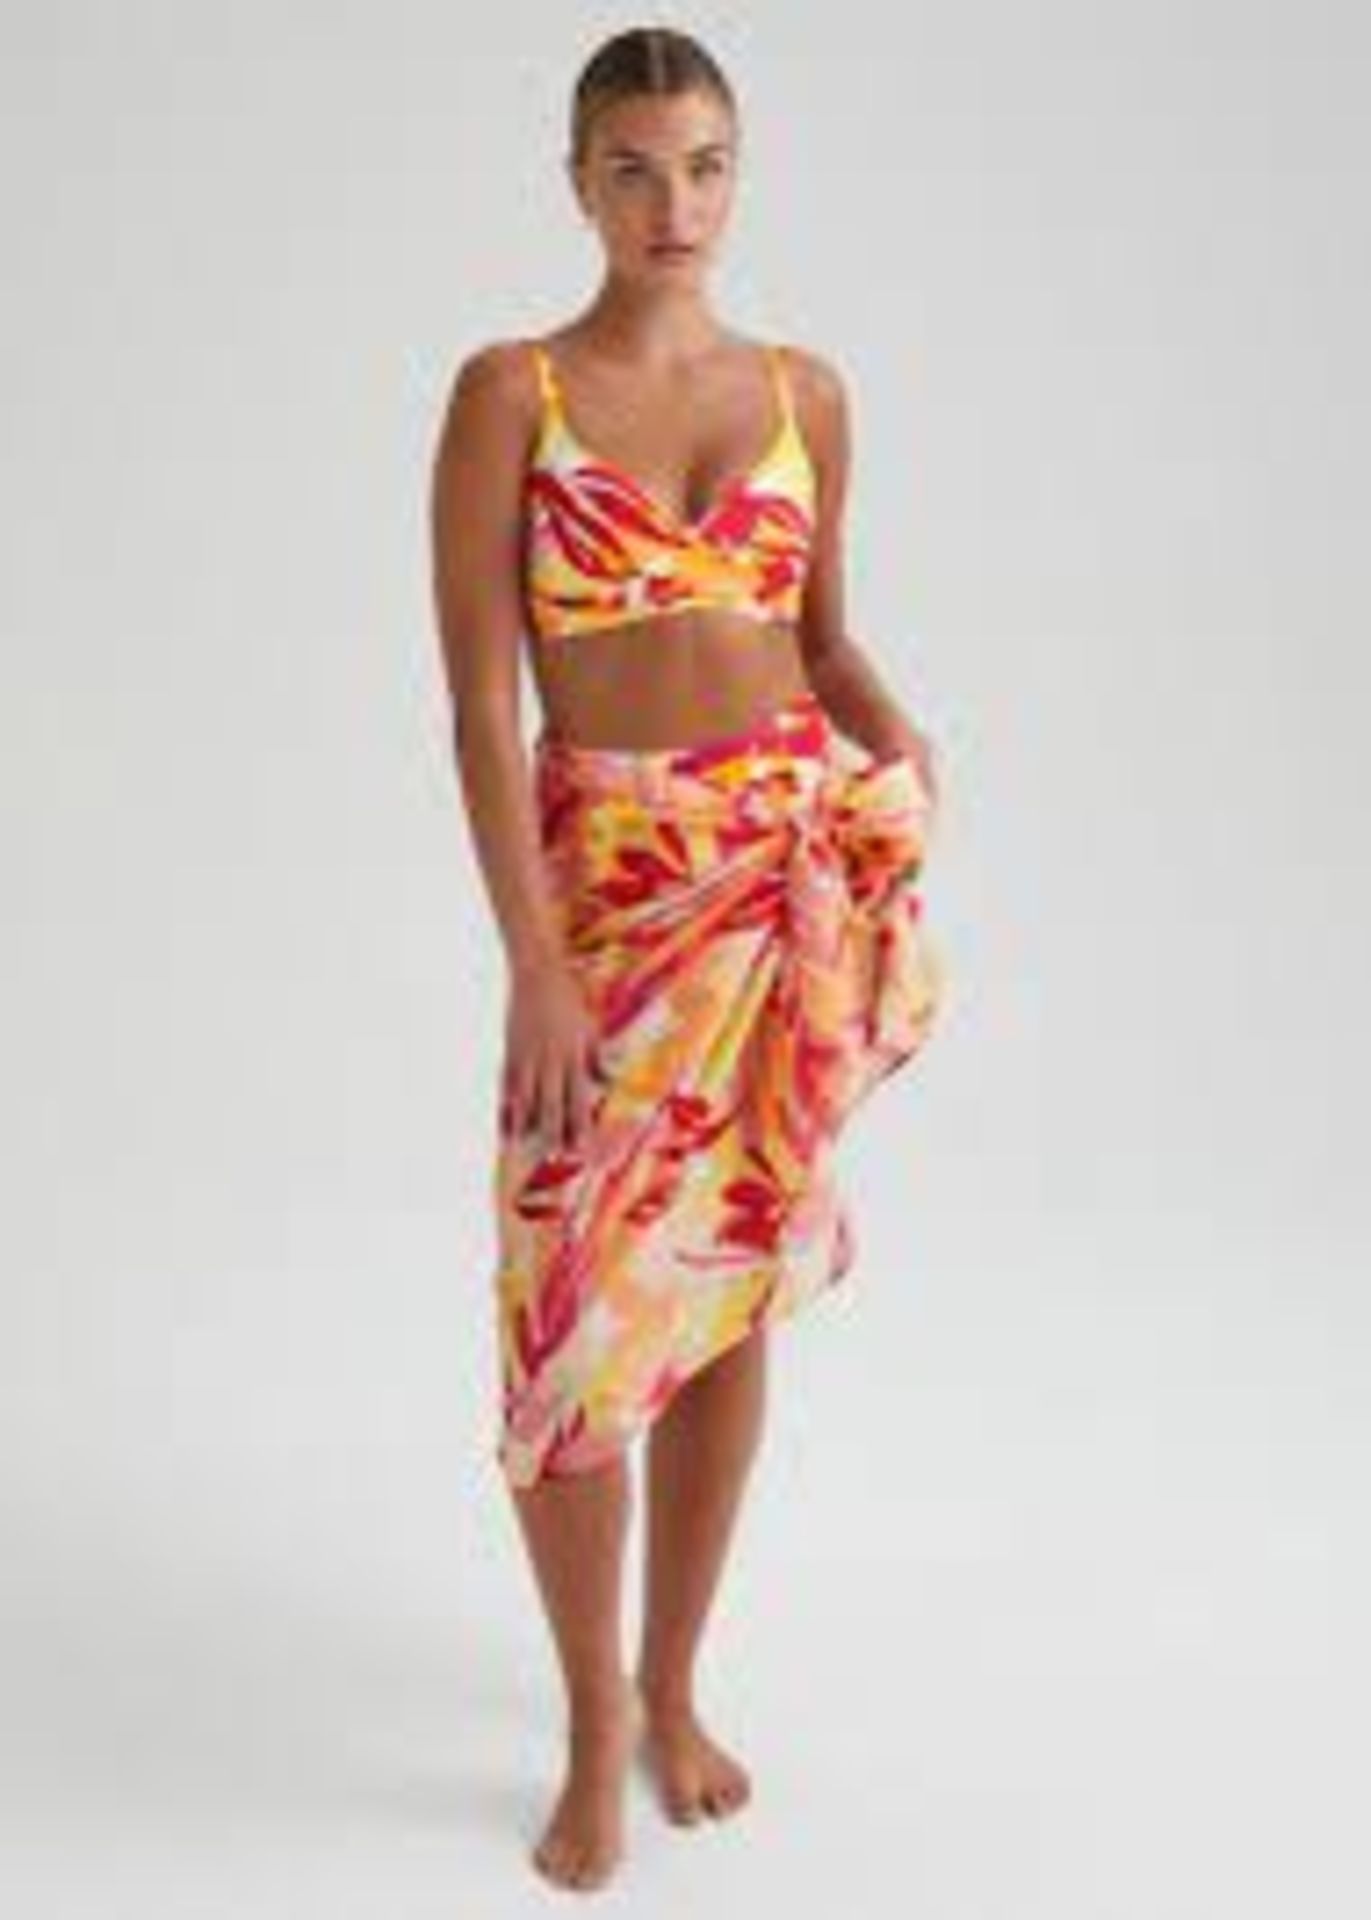 30 x NEW & PACKAGED MATALAN ET VOUS LADIES MULTIFUNCTIONAL SARONGS. PRICE TAGGED AT £8.50 EACH, - Image 9 of 9